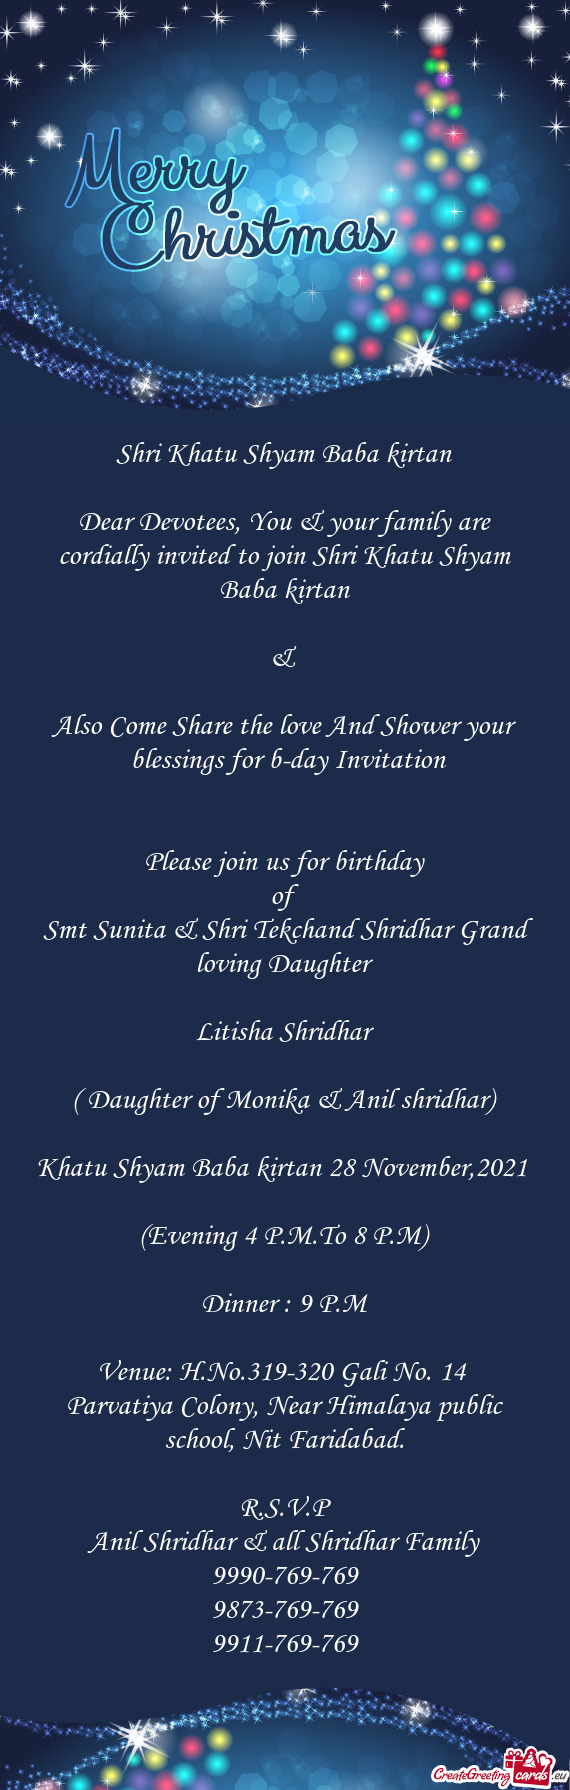 Please join us for birthday